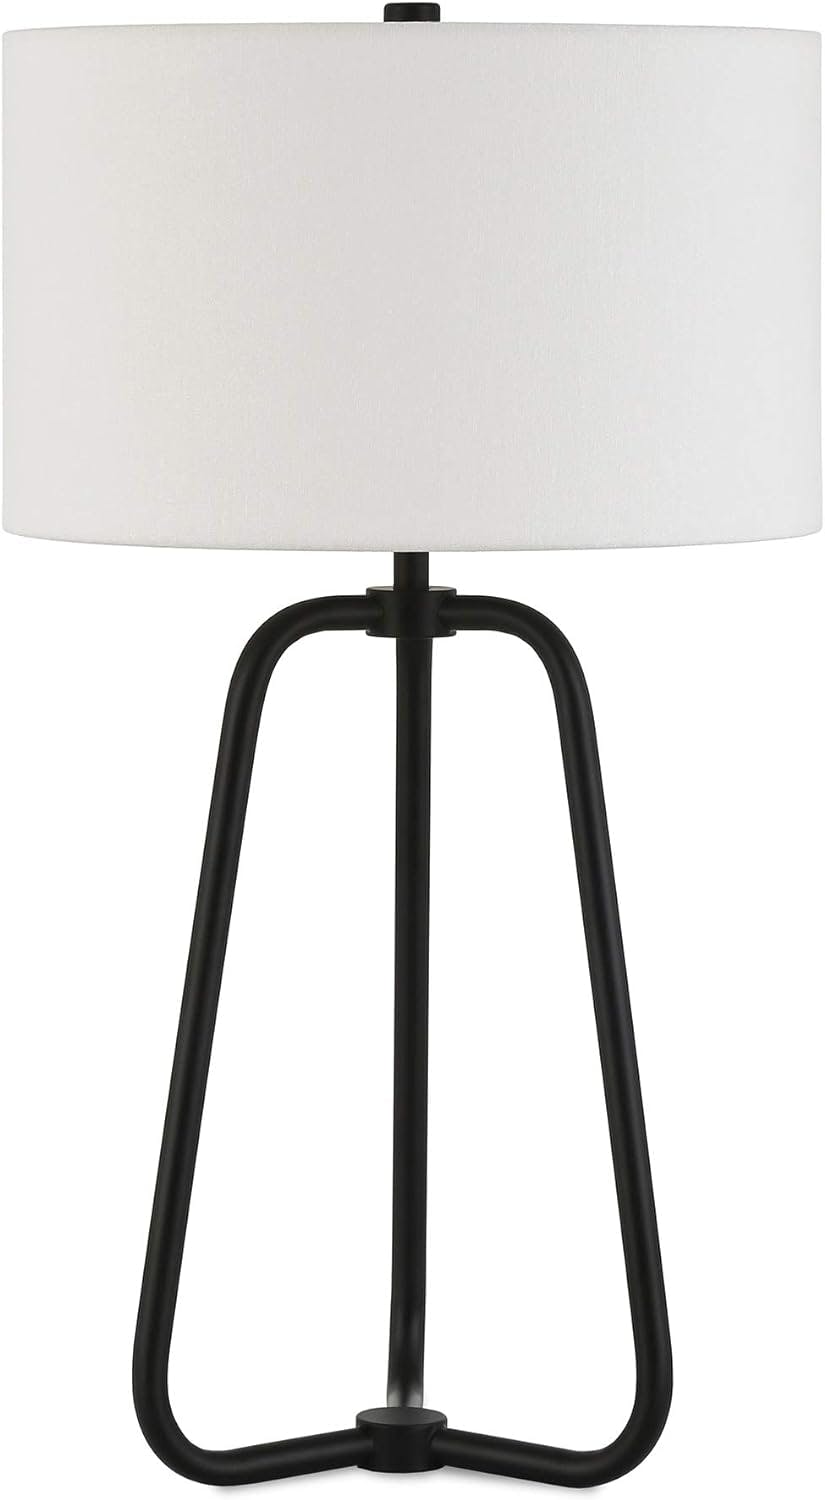 Marduk 25.5" Blackened Bronze Table Lamp with Linen Shade